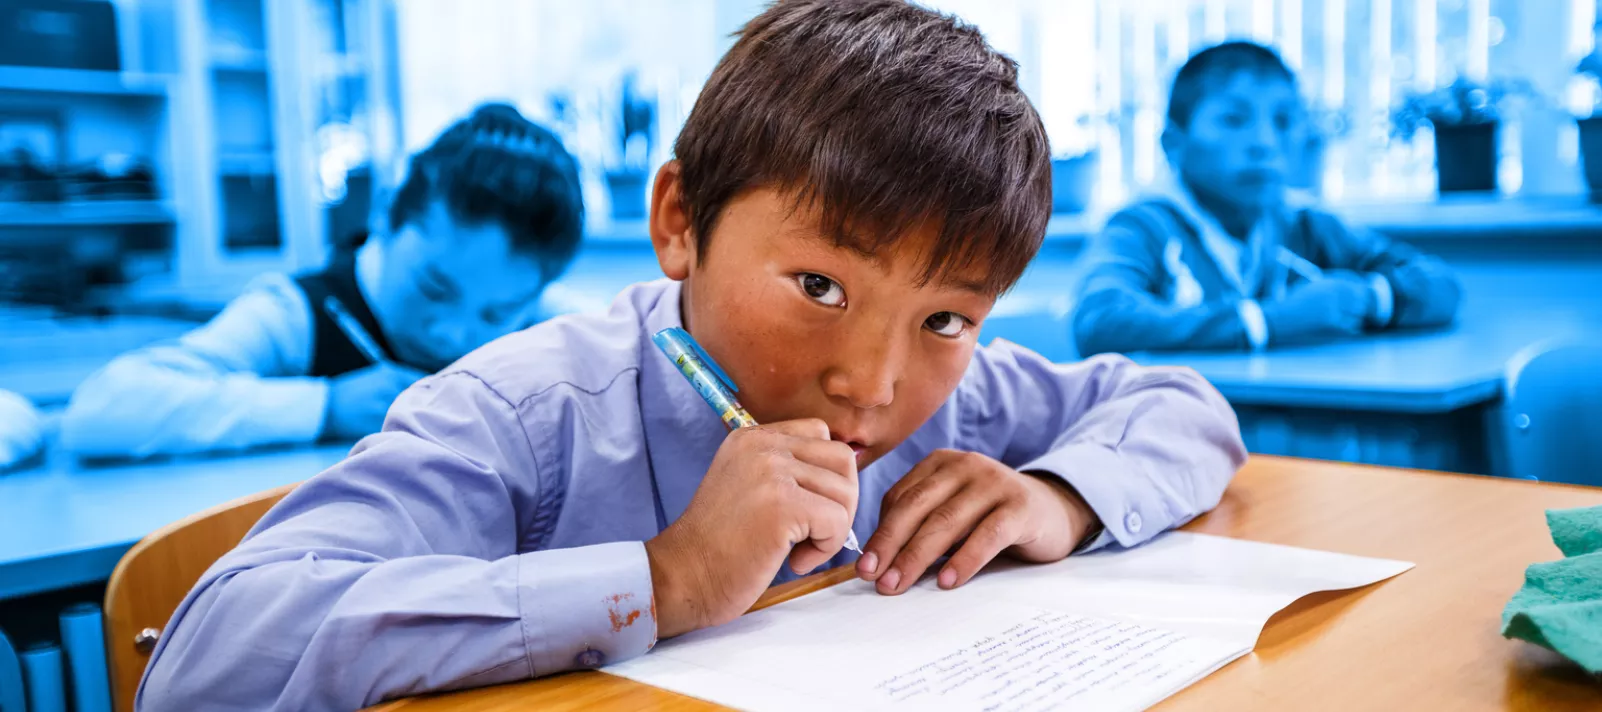 A boy looks the camera as he diligently writes down notes during class in Mongolia